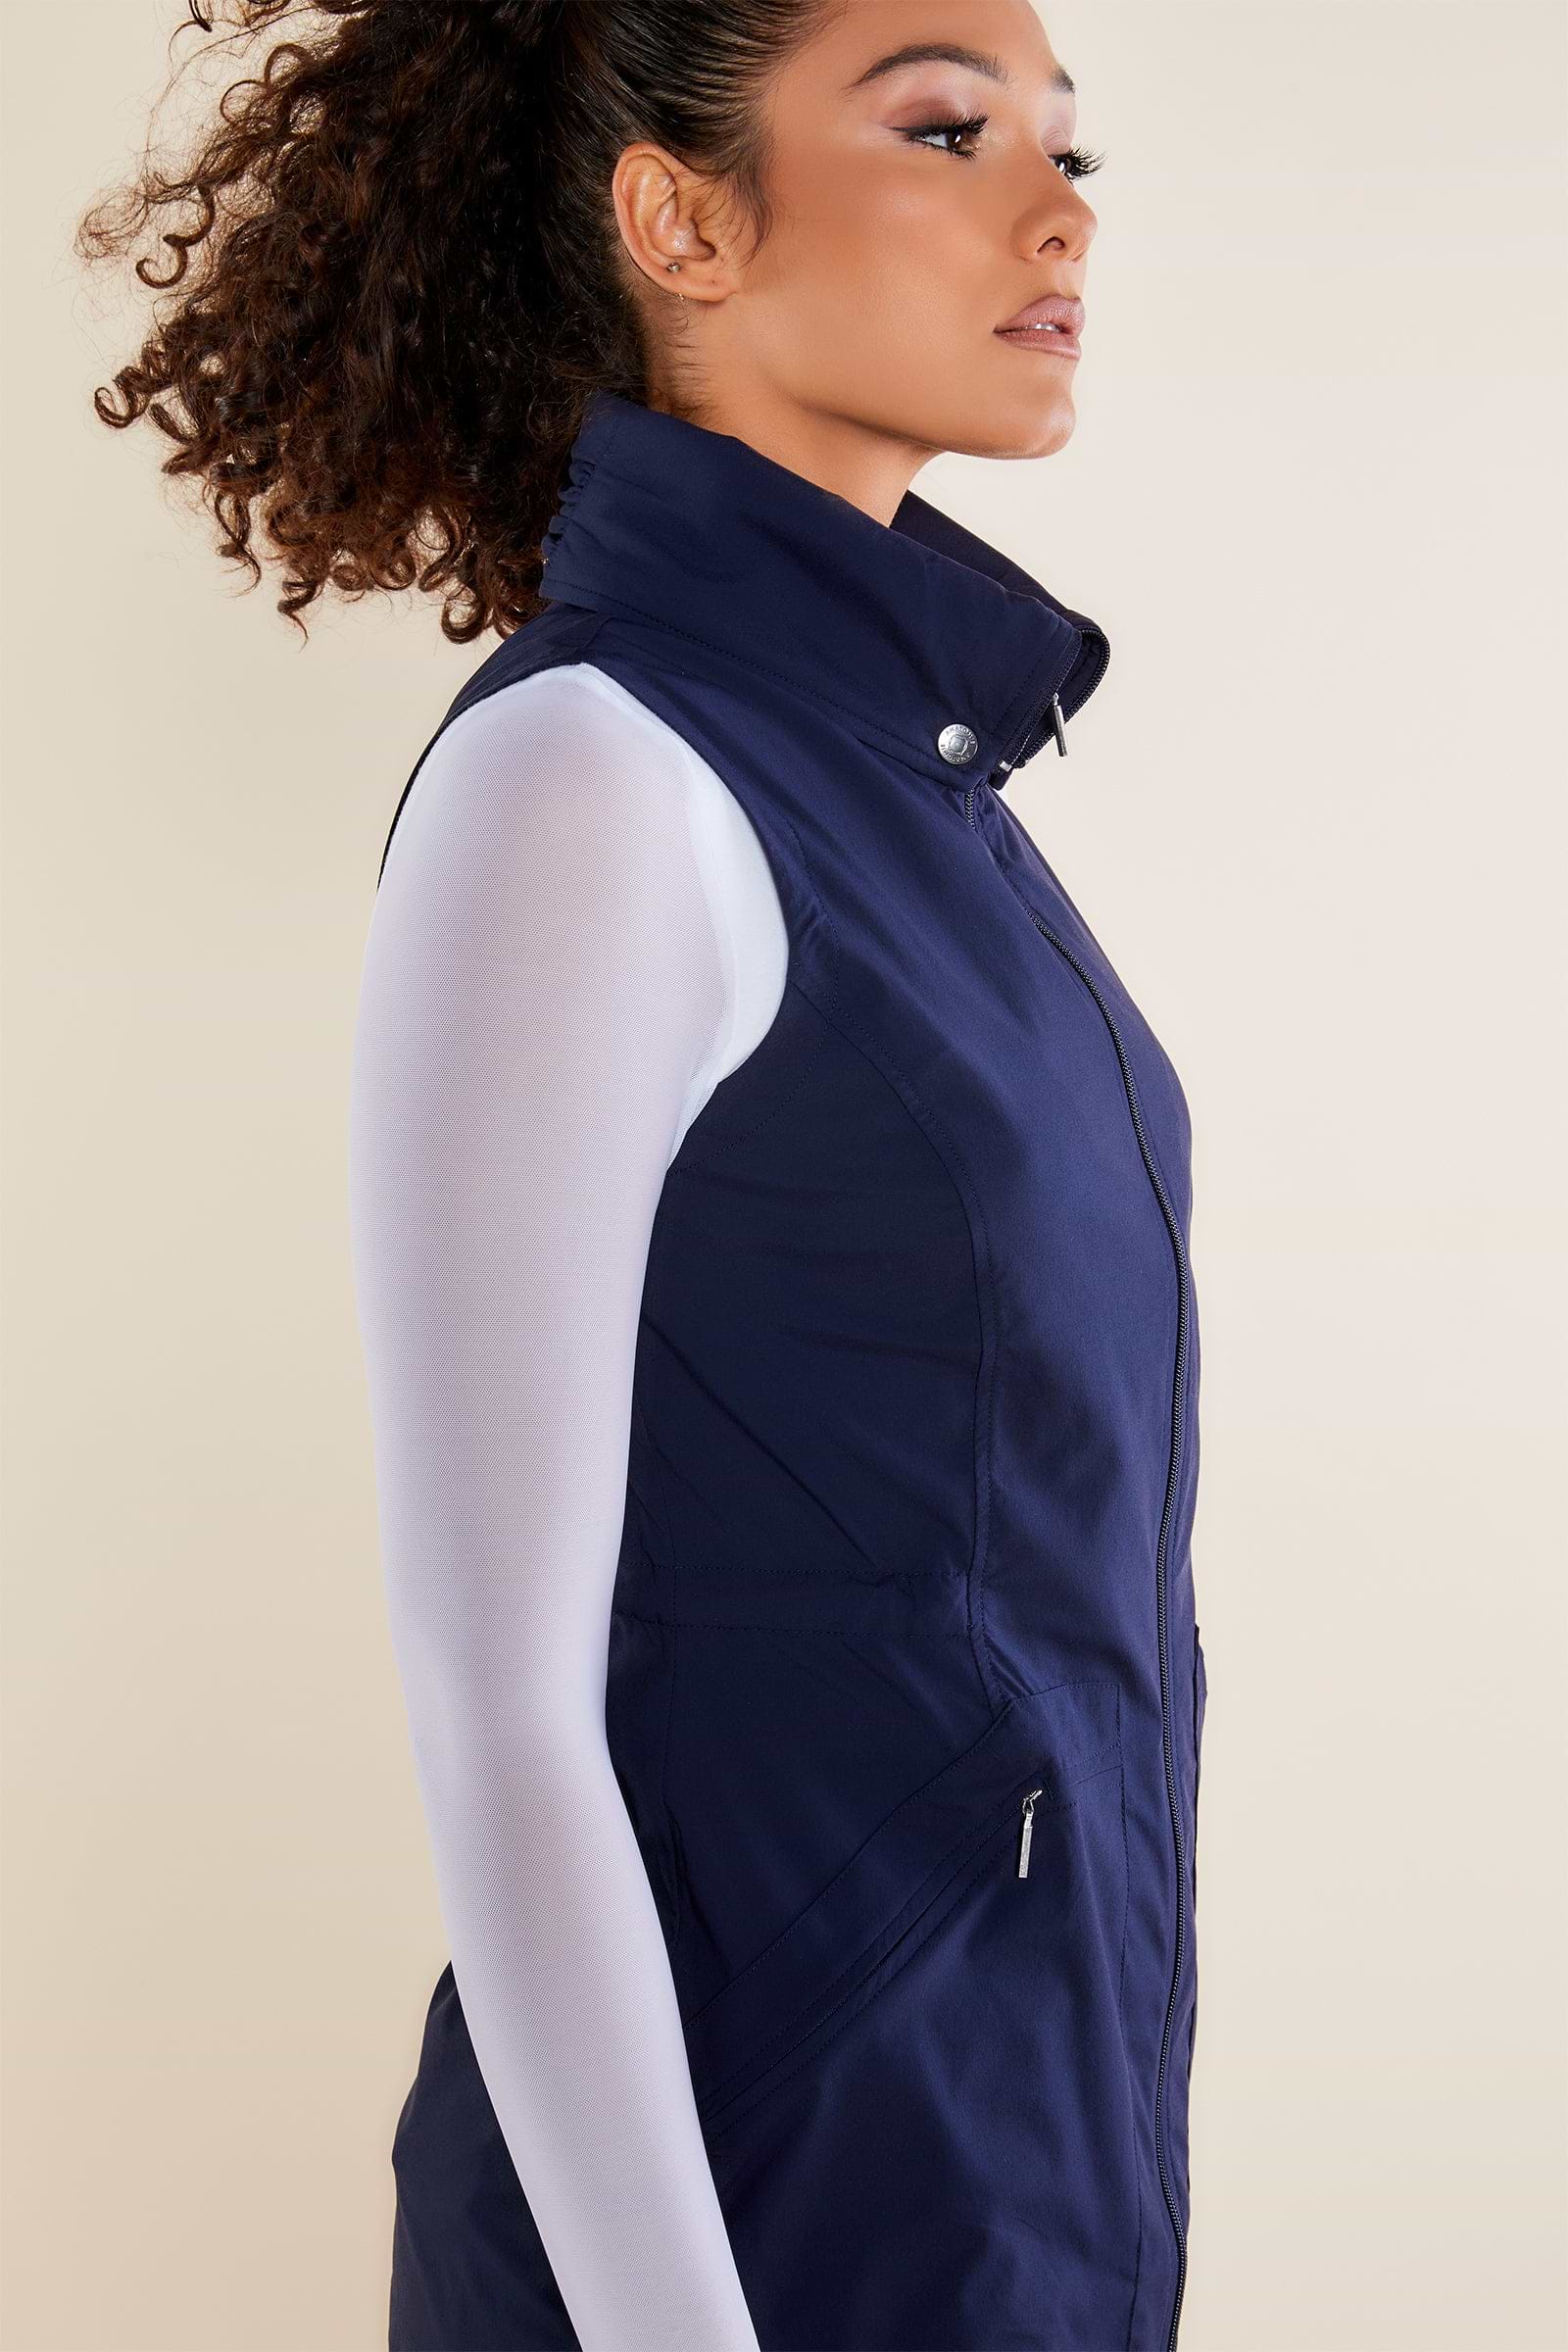 The Best Travel Vest. Woman Showing the Side Profile of a Delaney Travel Vest in Navy